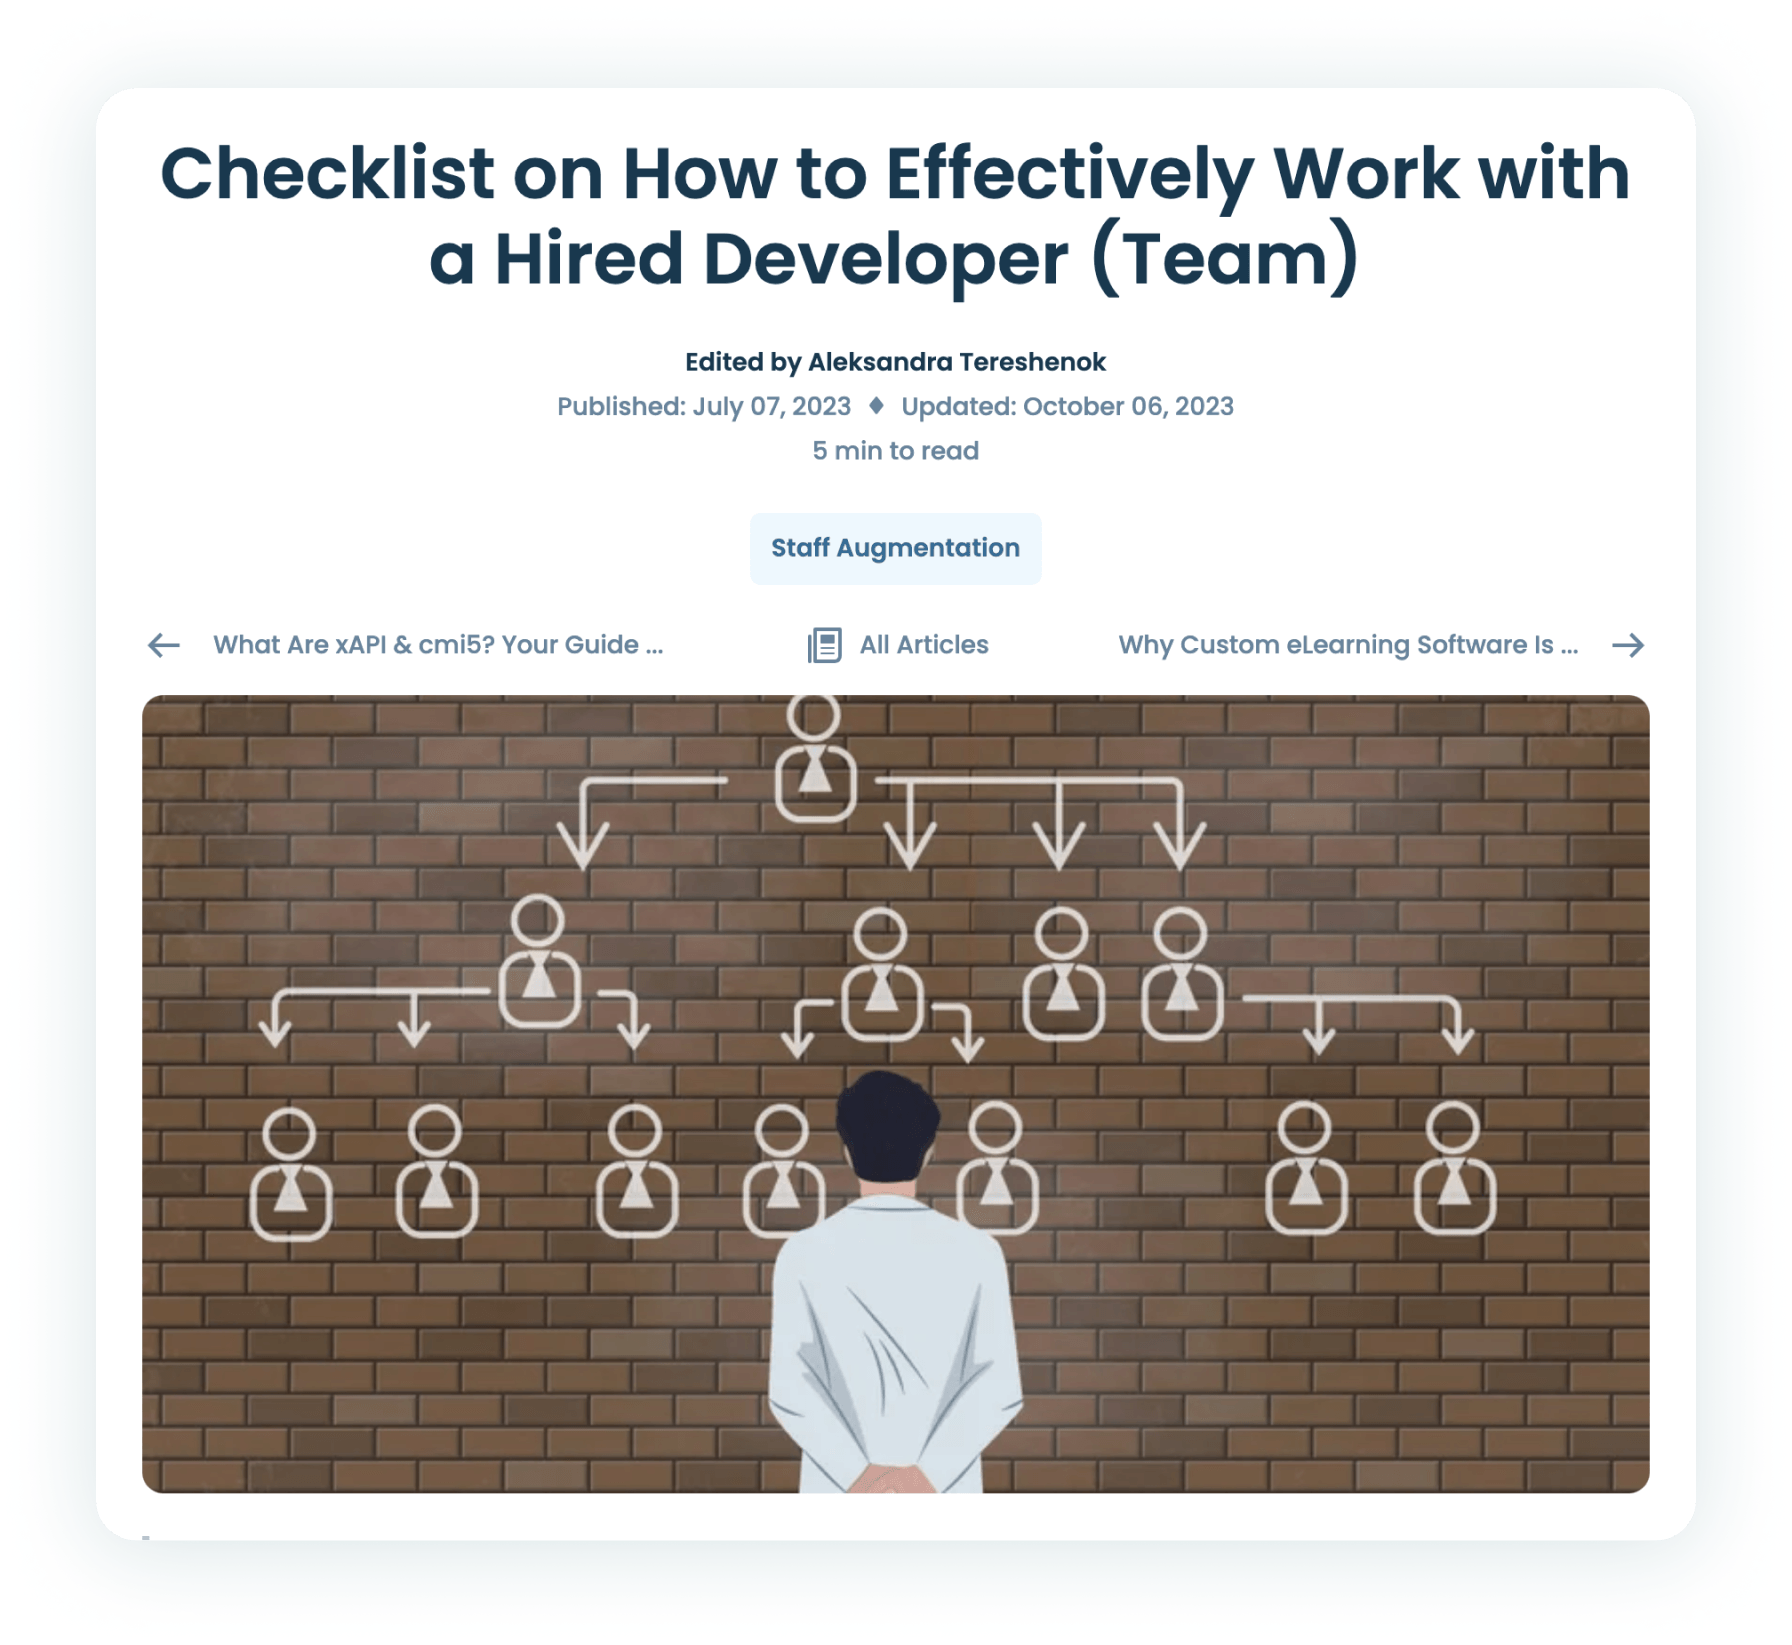 Checklist on How to Effectively Work with a Hired Developer